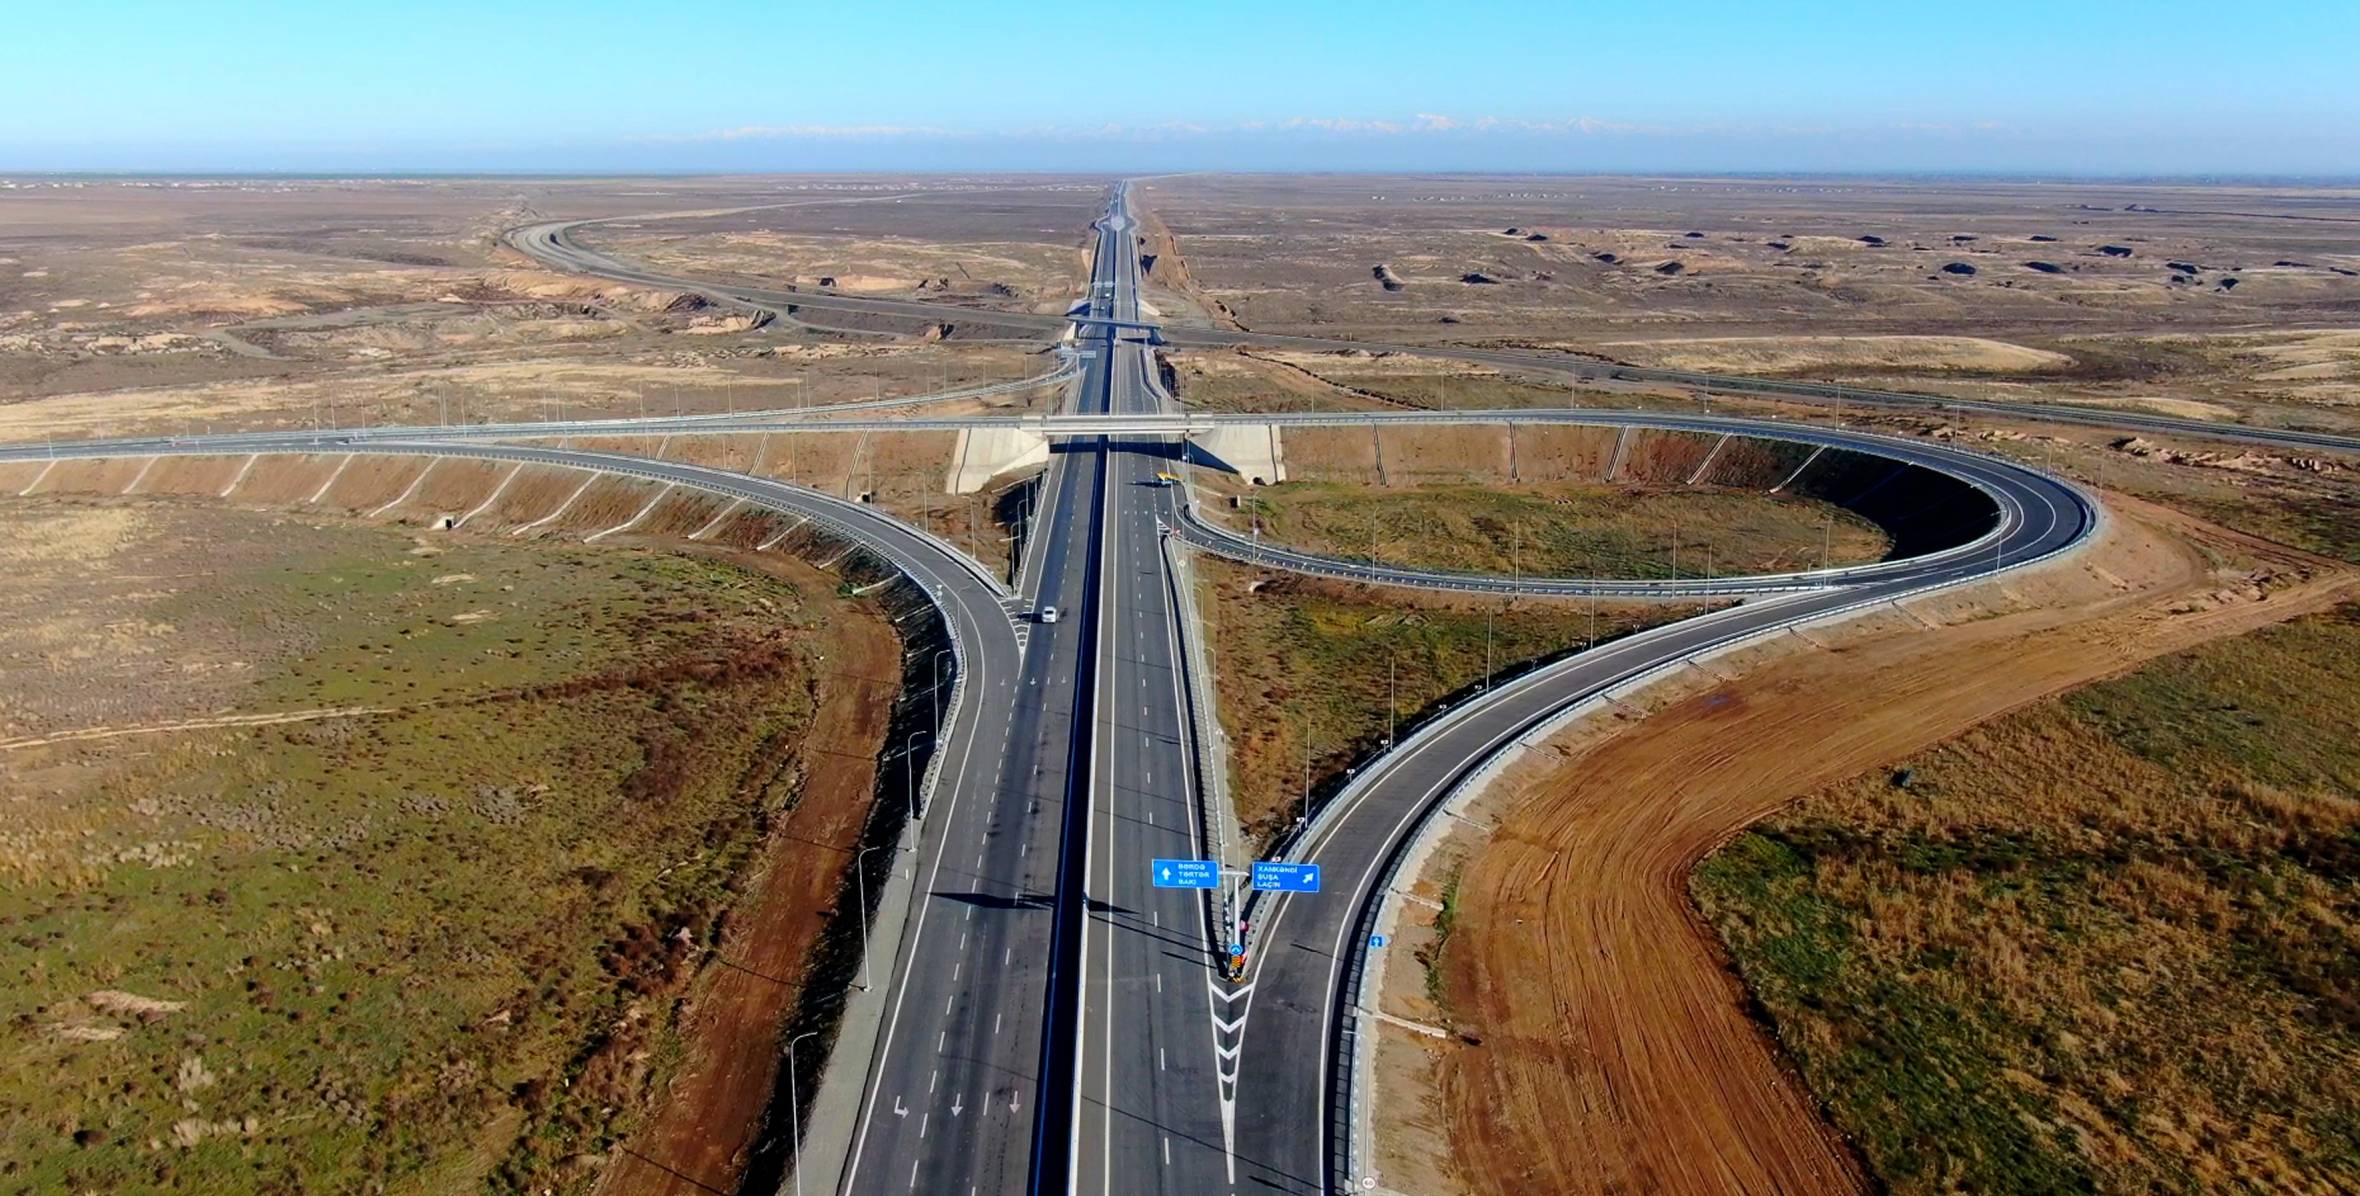 Ilham Aliyev has attended the opening of the Barda-Aghdam highway